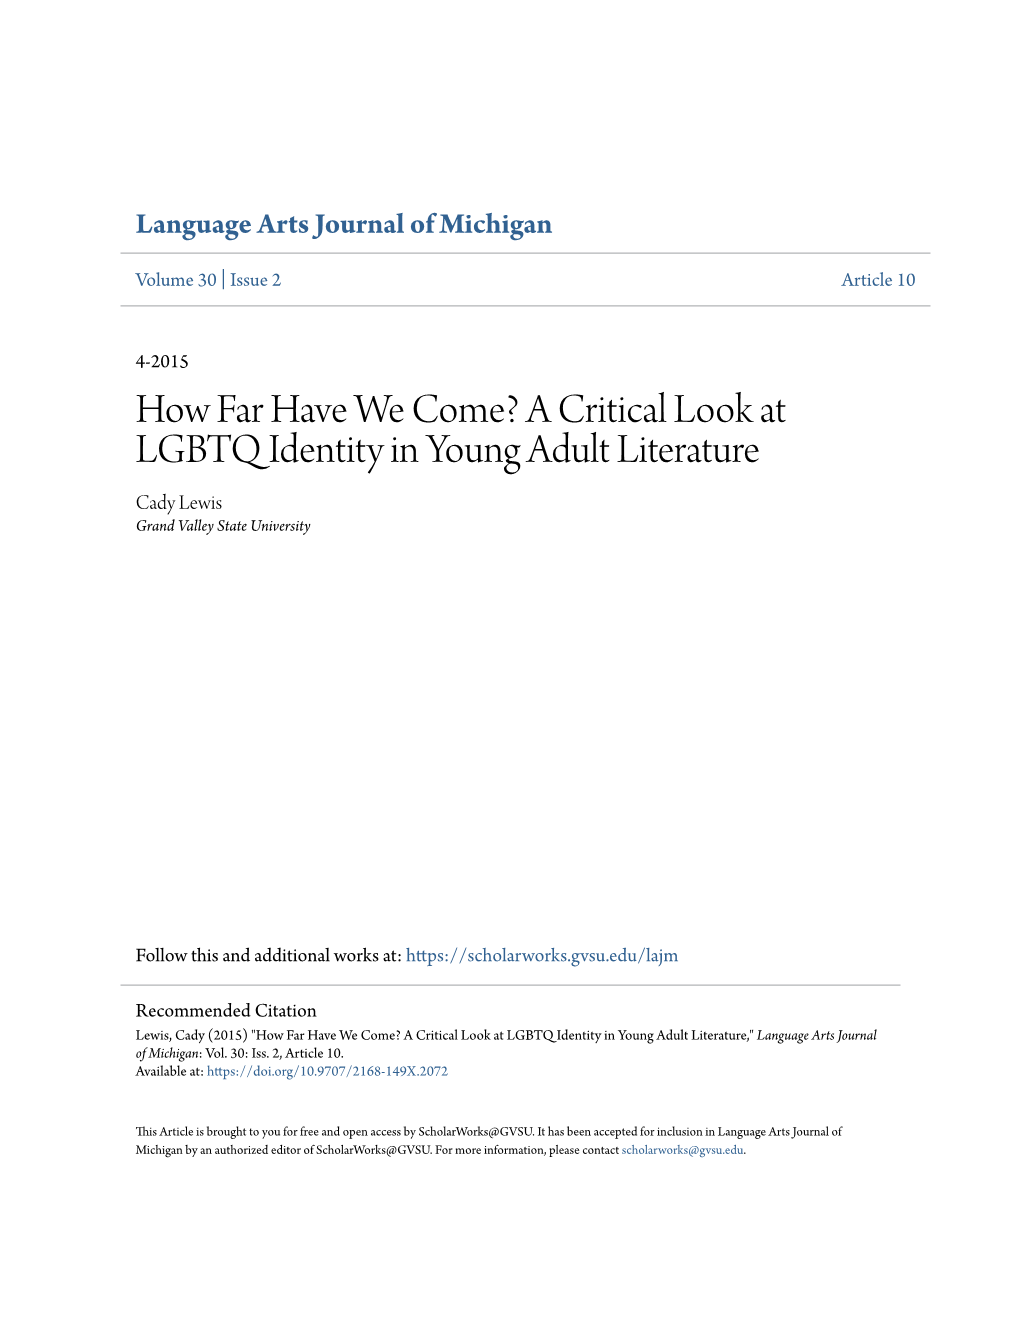 How Far Have We Come? a Critical Look at LGBTQ Identity in Young Adult Literature Cady Lewis Grand Valley State University